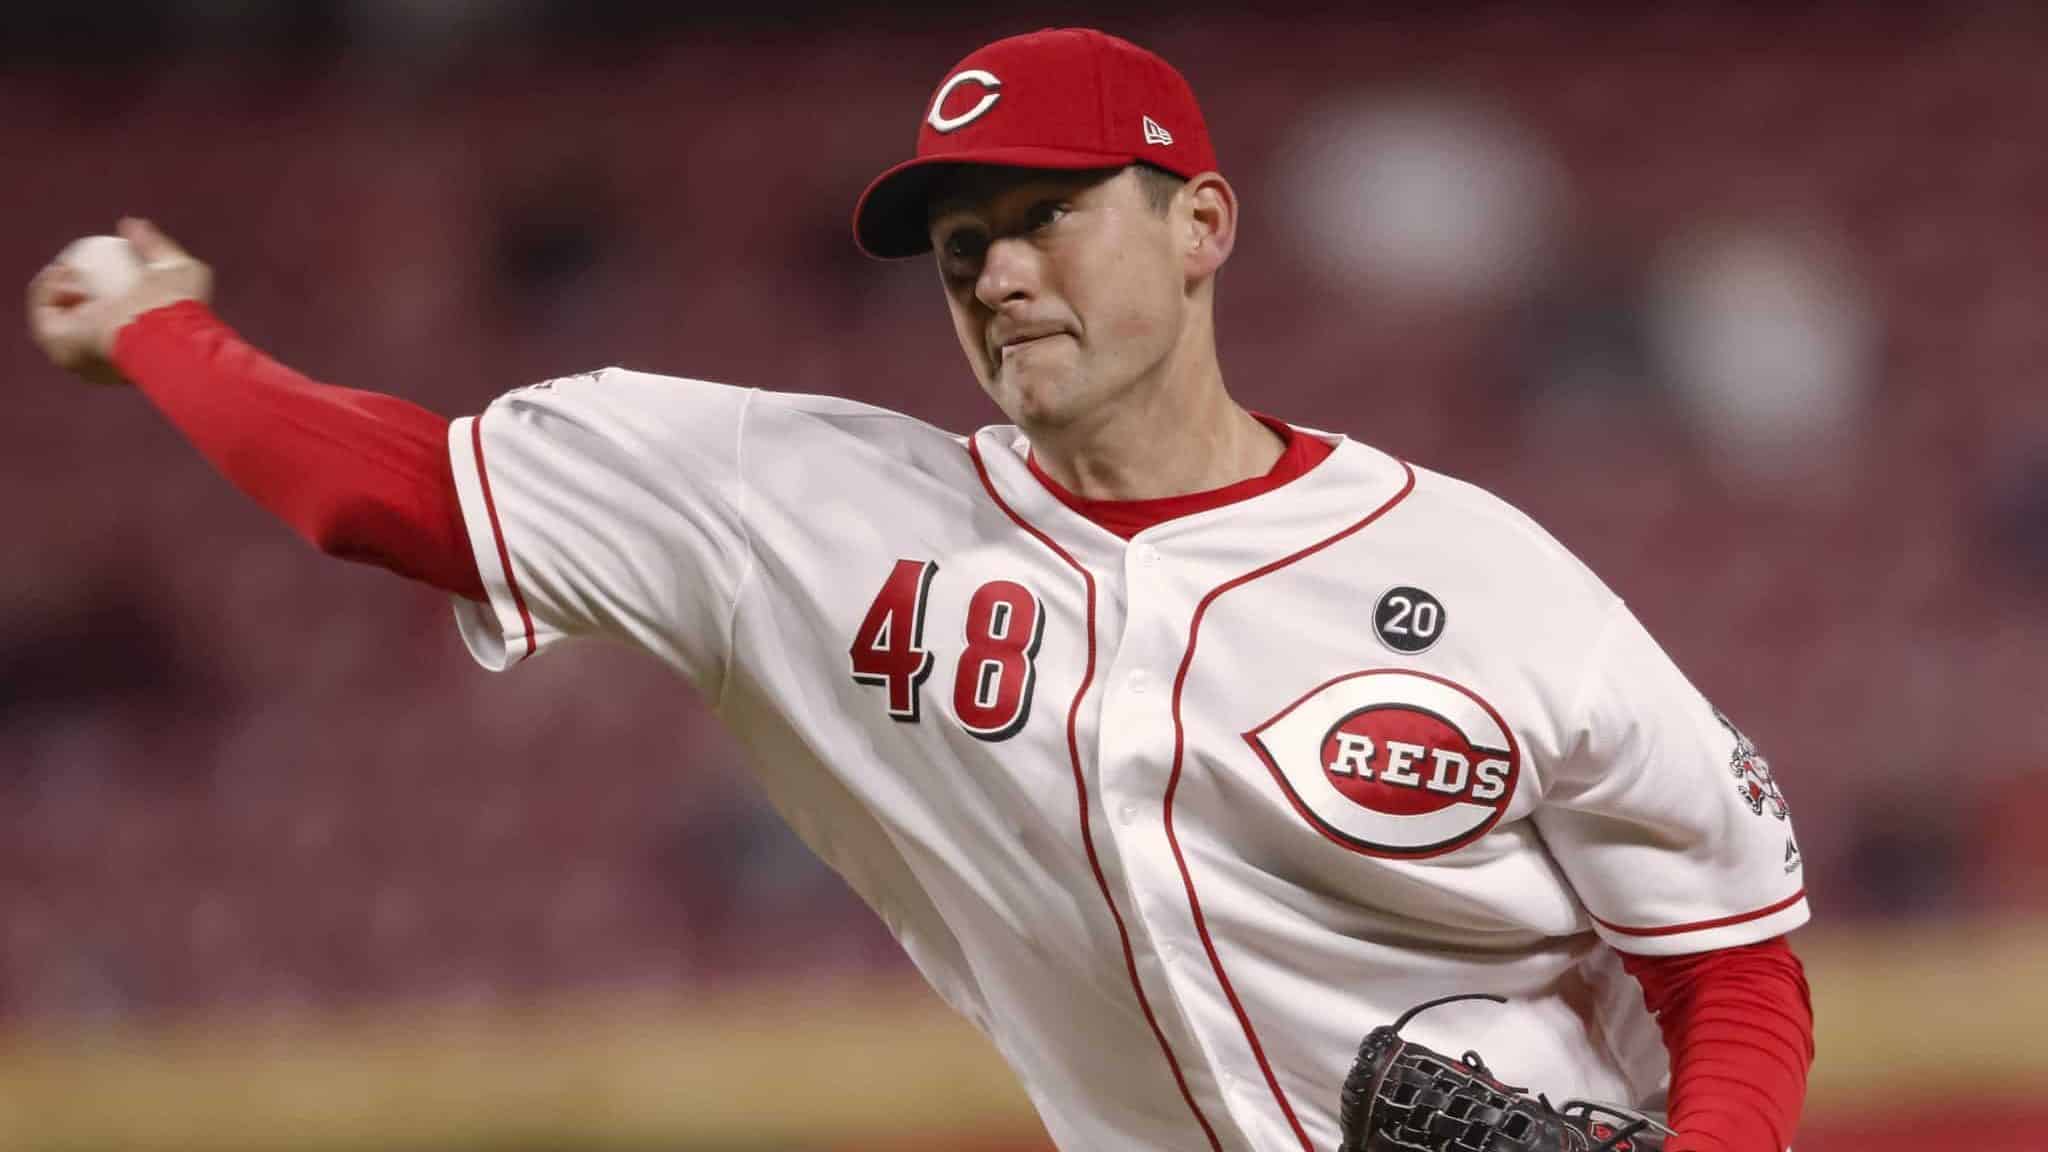 CINCINNATI, OH - APRIL 10: Jared Hughes #48 of the Cincinnati Reds pitches during the sixth inning of the game against the Miami Marlins at Great American Ball Park on April10, 2019 in Cincinnati, Ohio.